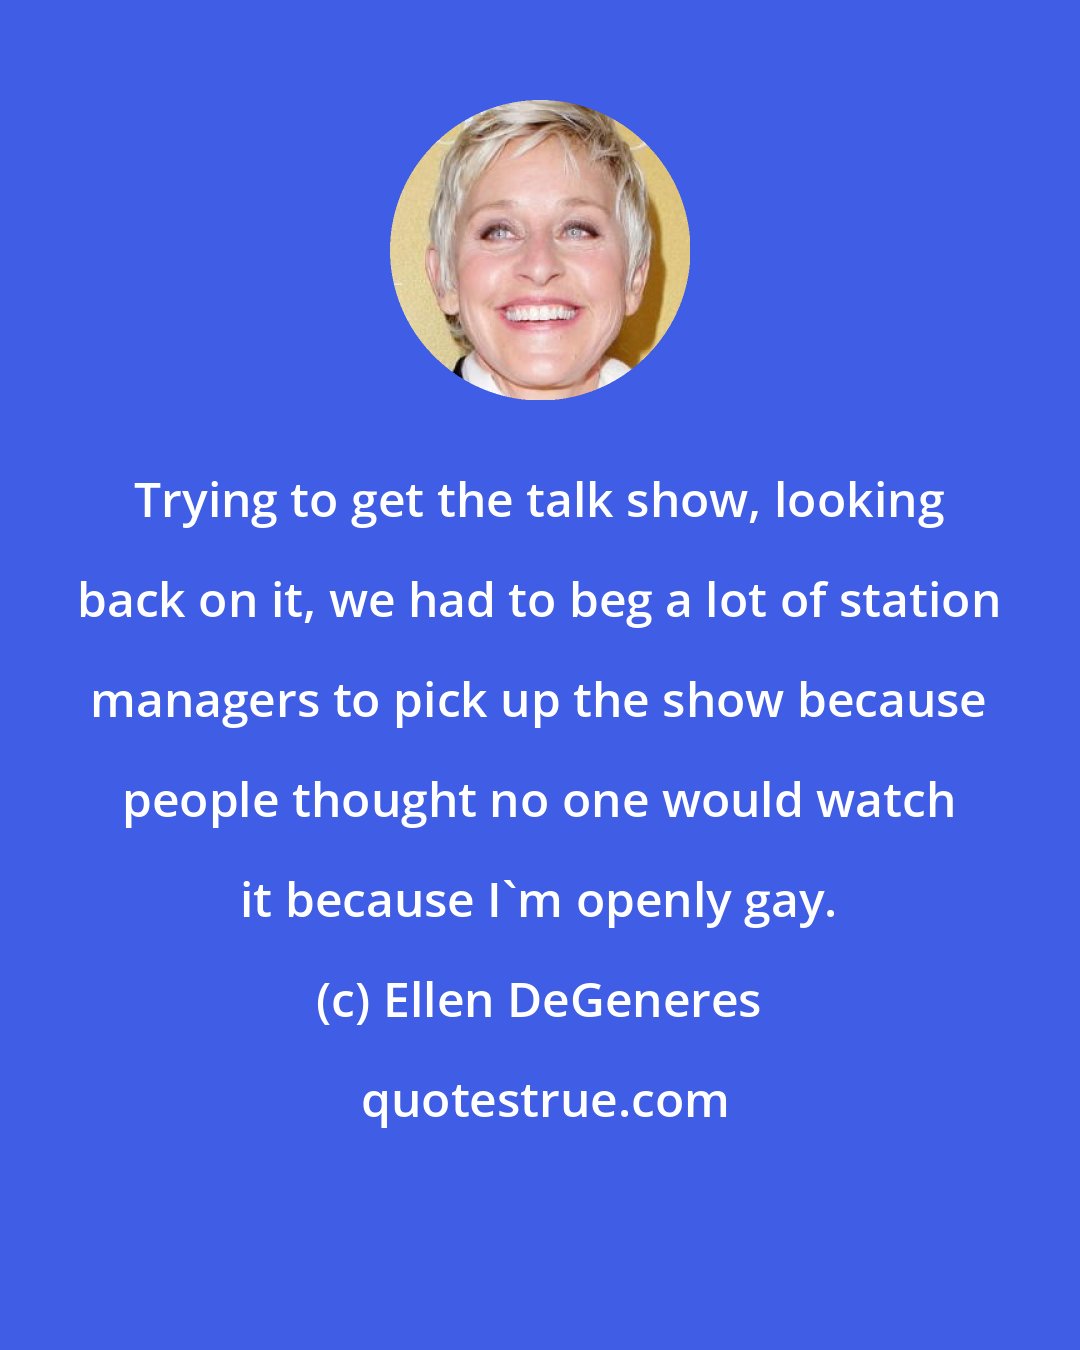 Ellen DeGeneres: Trying to get the talk show, looking back on it, we had to beg a lot of station managers to pick up the show because people thought no one would watch it because I'm openly gay.